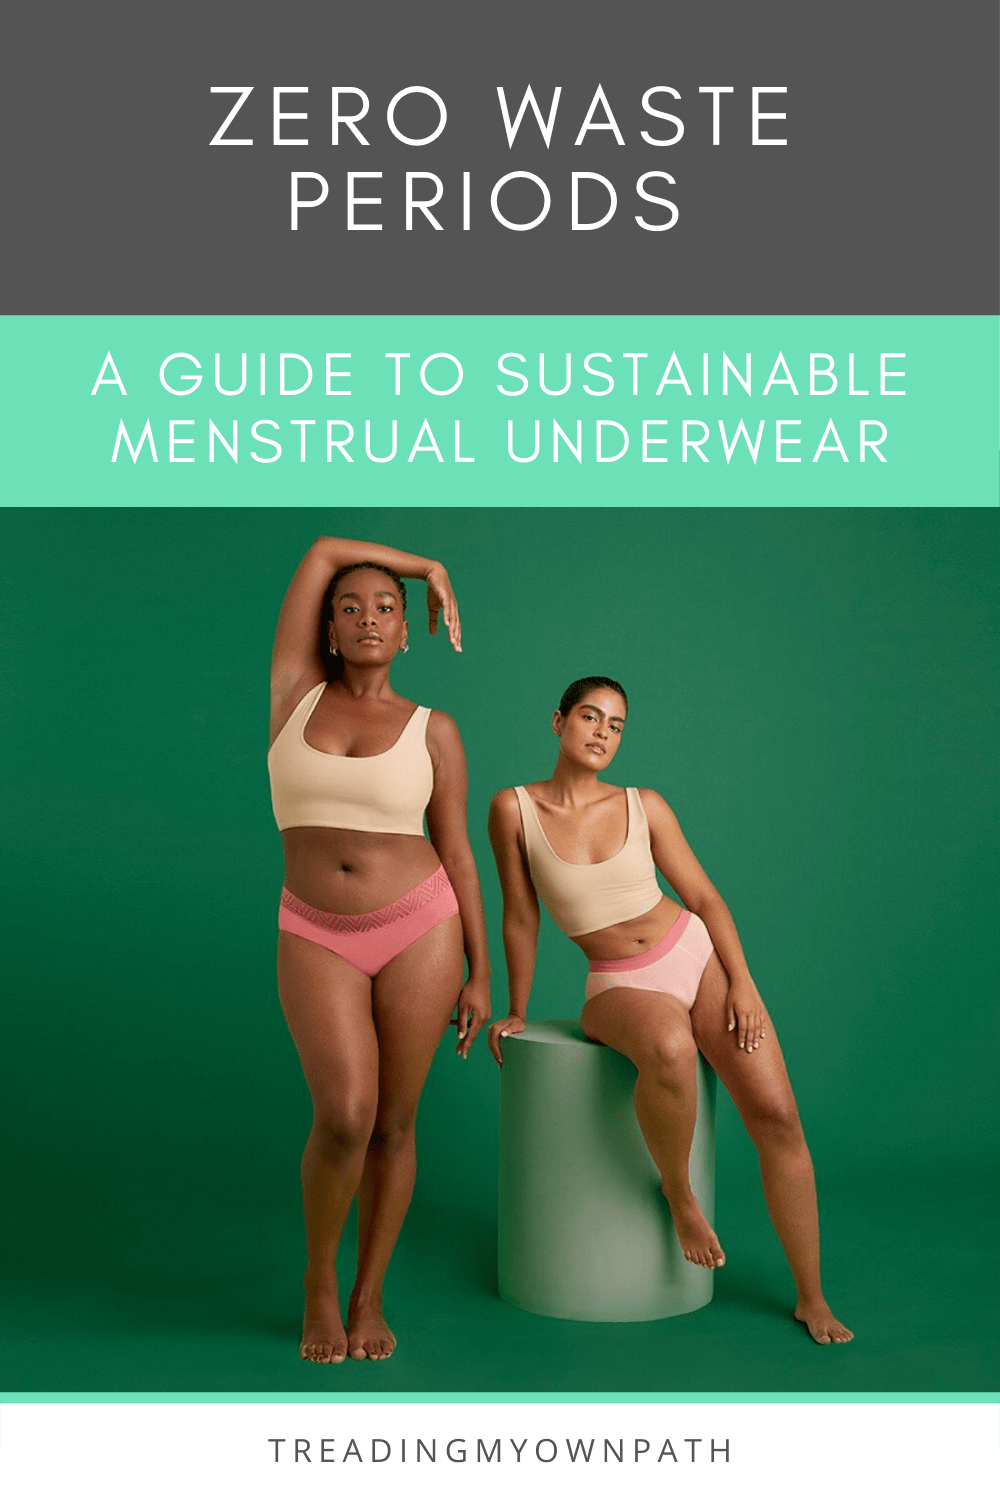 Zero waste periods: the pros and cons of menstrual underwear (+ 6 brands to consider)